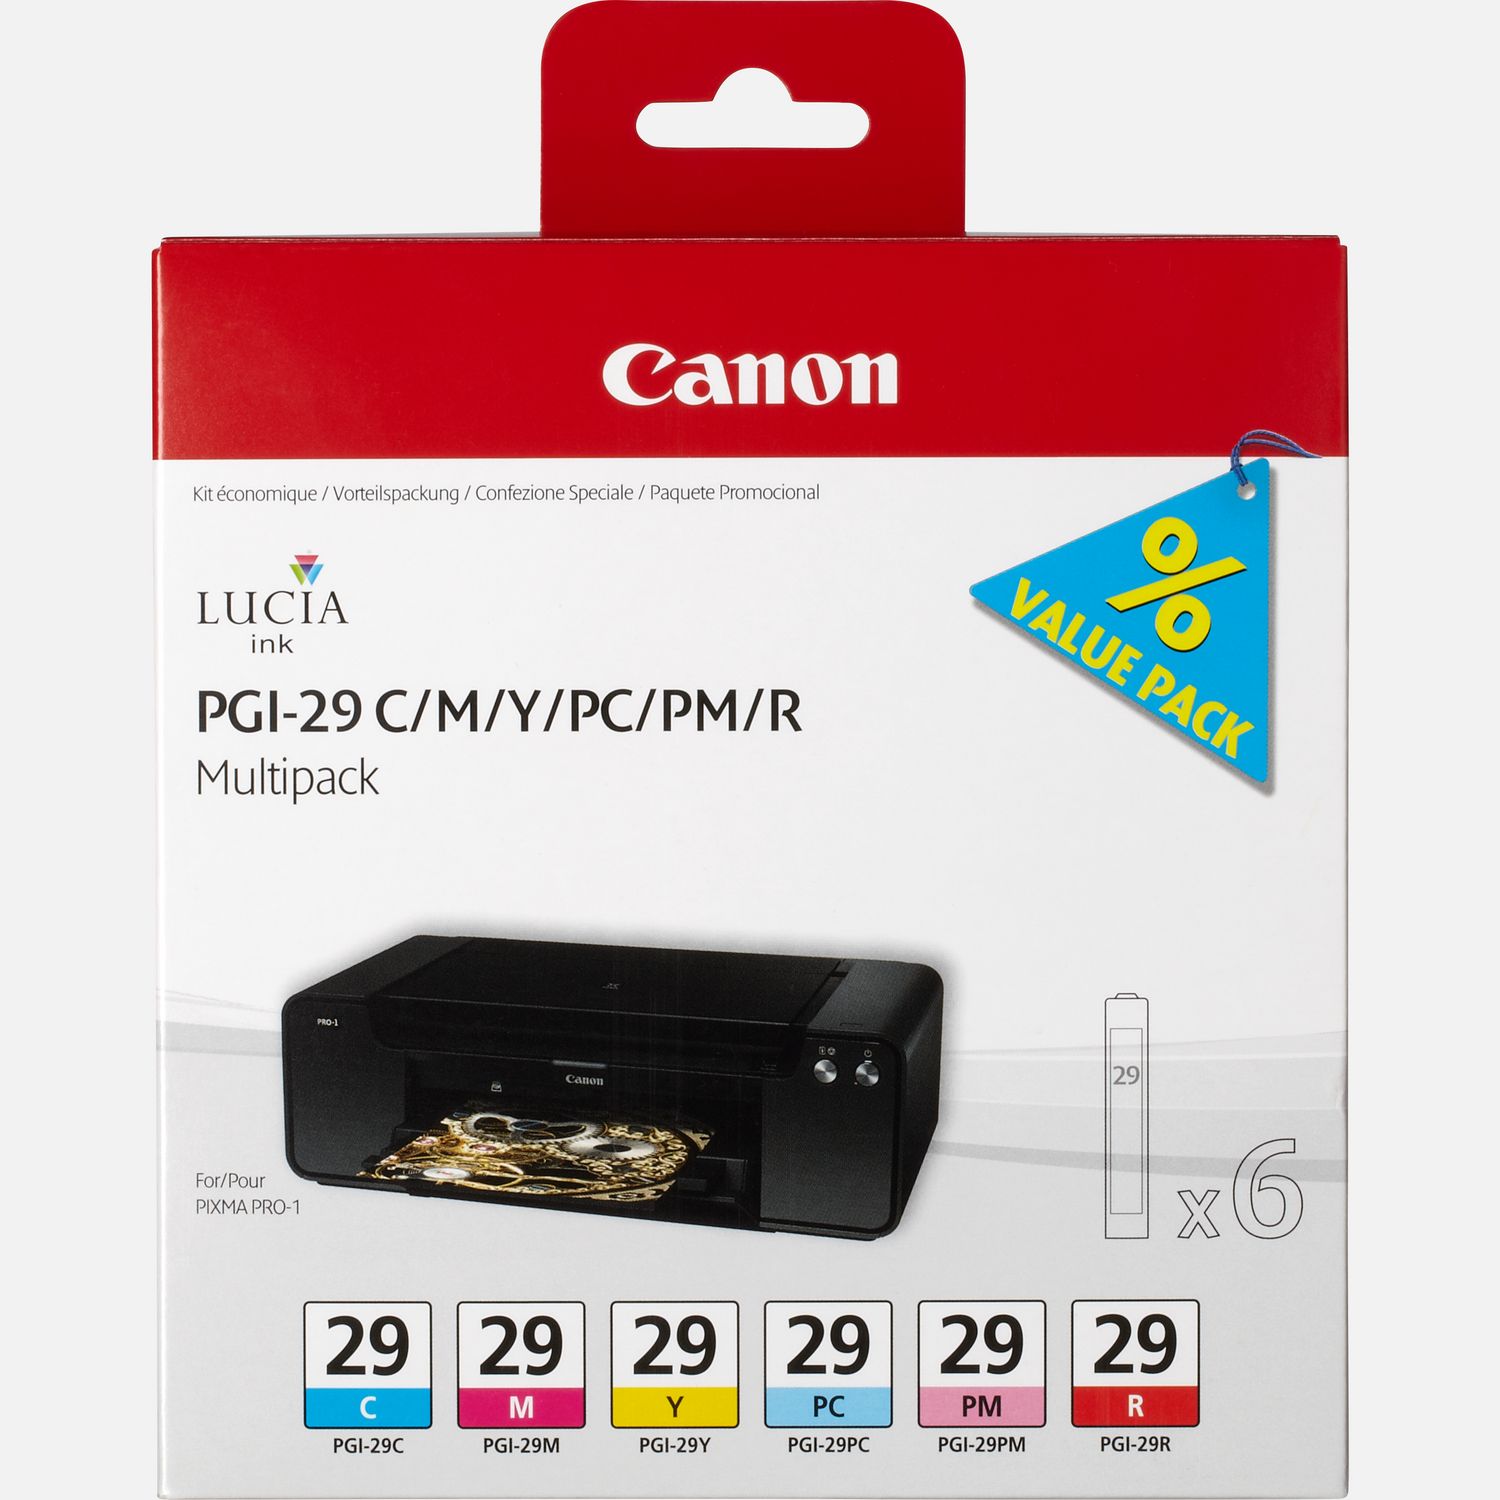 Image of 6 Cartucce Inkjet Multipack Canon PGI-29 C/M/Y/PC/PM/R